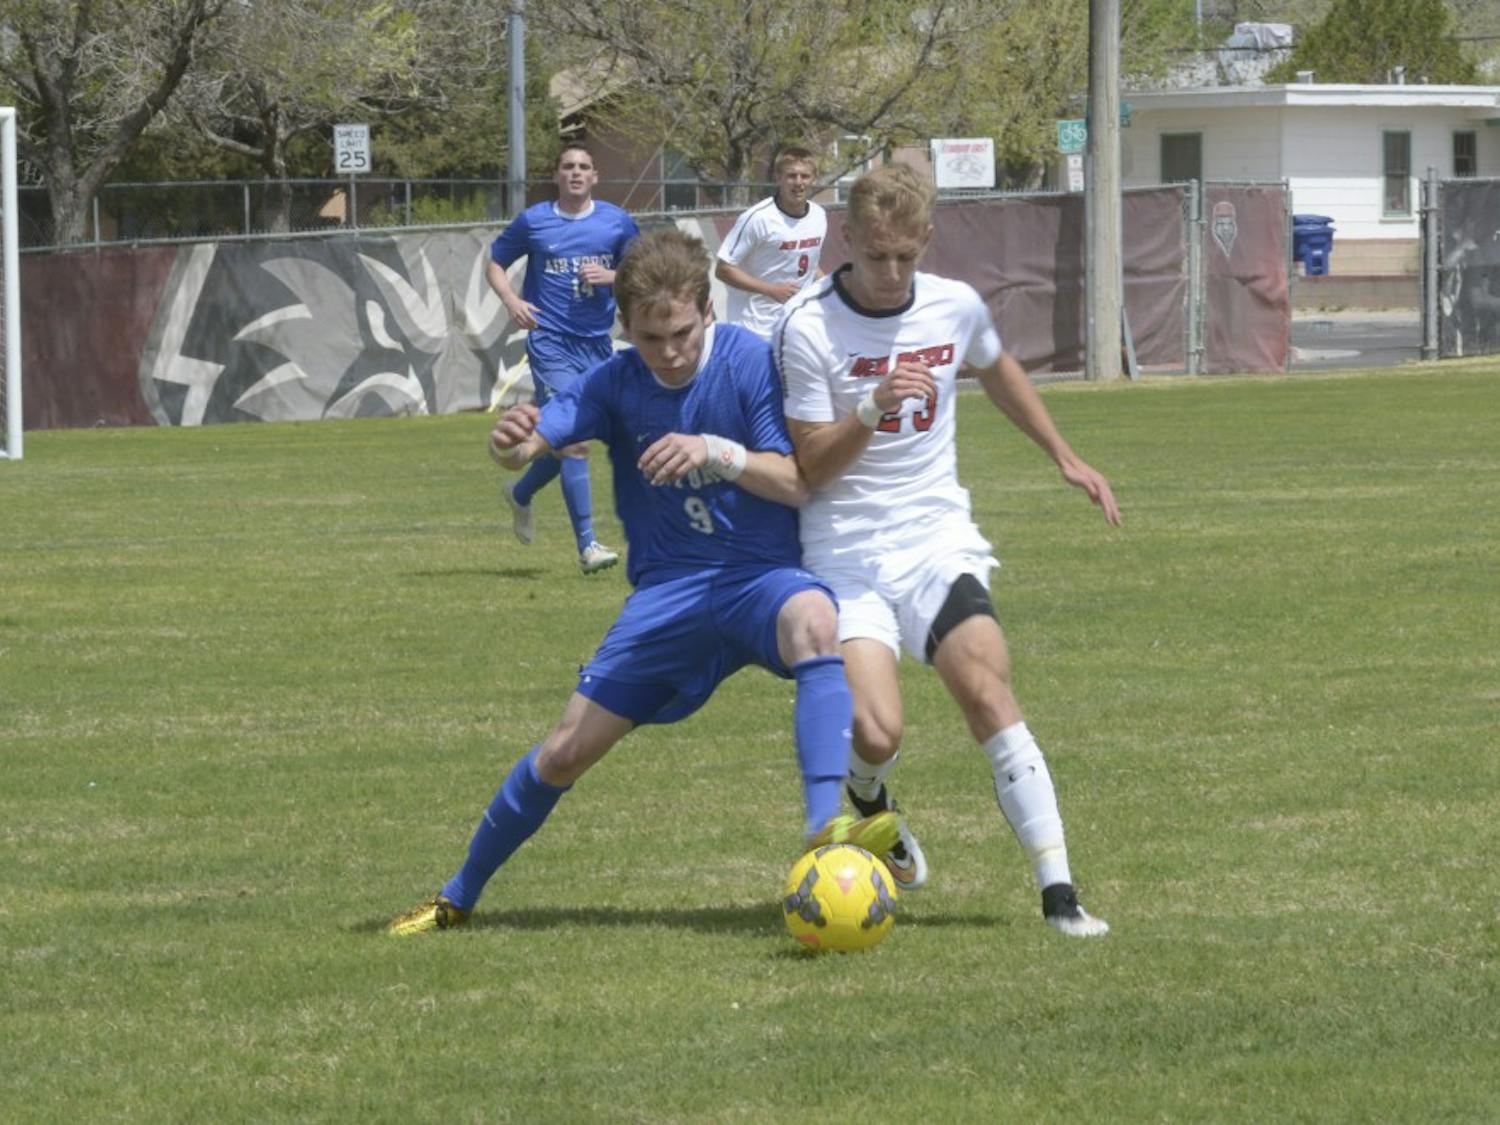 UNM freshman forward/midfielder Sam Gleadle tries to steal the ball from Air Forces Ryan Ward on Saturday afternoon at Robertson Field. The Lobos defeated the Falcons 2-1 in overtime.